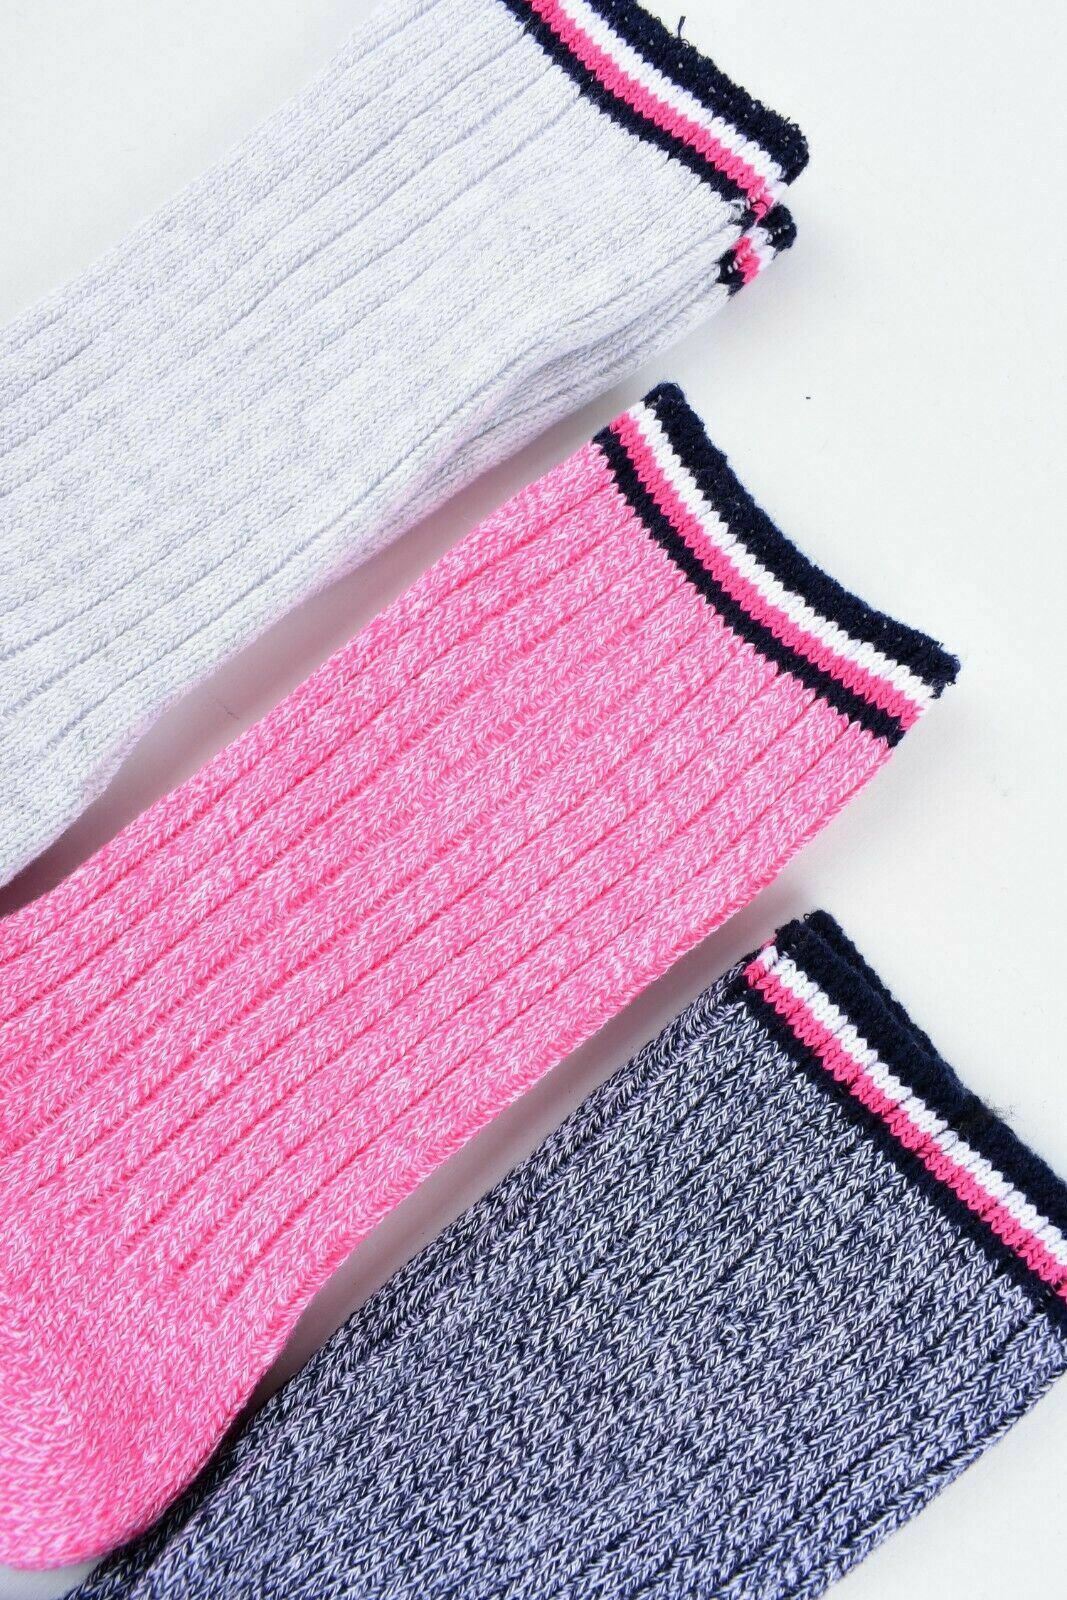 TOMMY HILFIGER 3-pack Girls' Camper Socks, Grey/Pink/Charcoal, size 7-10 years